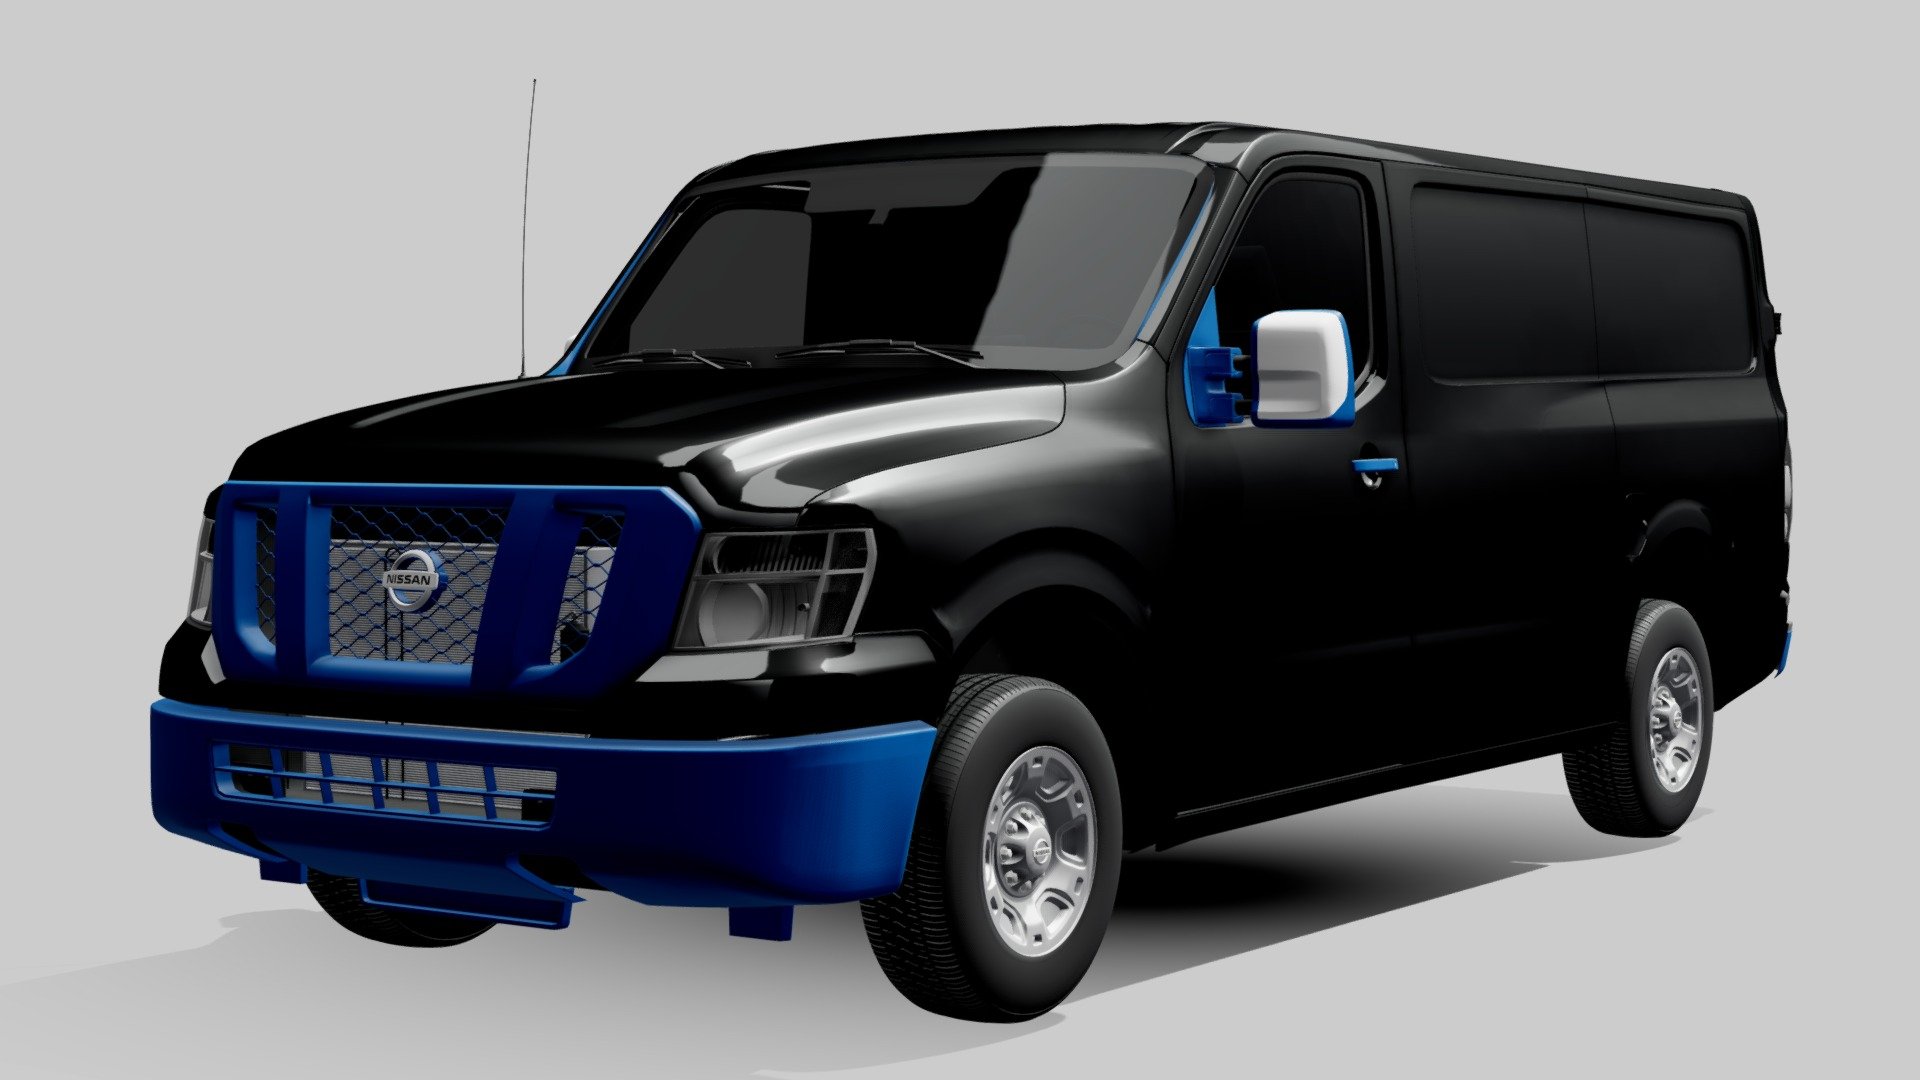 Nissan NV Cargo 2500HDV8 SV 2022

Creator 3D Team model



Why choose our models?




Suitable for close-up rendering;

All objects are intelligently separated and named; 

All materials are correctly named;

You can easily change or apply new materials, color etc;

The model have good topology;

The model have real dimensions. Real world scaled. Set to origin(0,0,0 xyz axis);

Suitable for animation and high quality photorealistic visualization;

Rendering studio scene with all lighting, cameras, materials, environment setups is included;

HDR Maps are included;

Everything is ready to render. Just click on the render button and you'll get  picture like in preview image!

Doesn't need any additional plugins;

High quality exterior and basic interior; 

The textures are included;

Thank you for buying this product. We look forward to continuously dealing with you.
 Creator 3D team!!! - Nissan NV Cargo 2500HDV8 SV 2022 - Buy Royalty Free 3D model by Creator 3D (@Creator_3D) 3d model